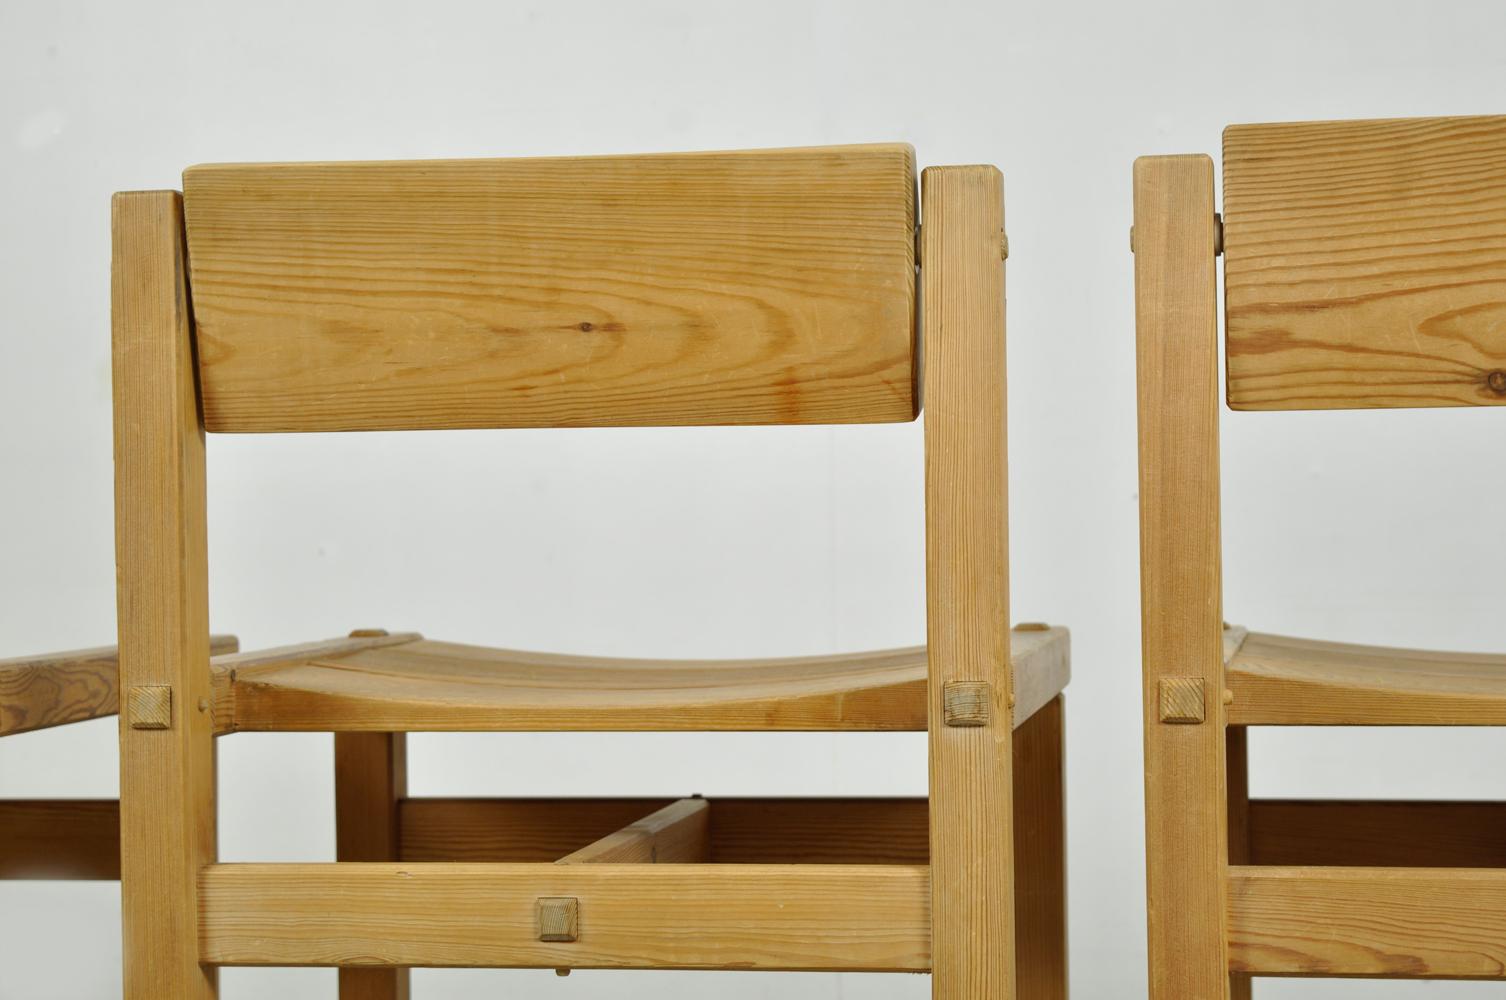 Trybo pine dining chairs (4) by Edvin Helseth for Stange Bruk, Norway 1960s For Sale 5